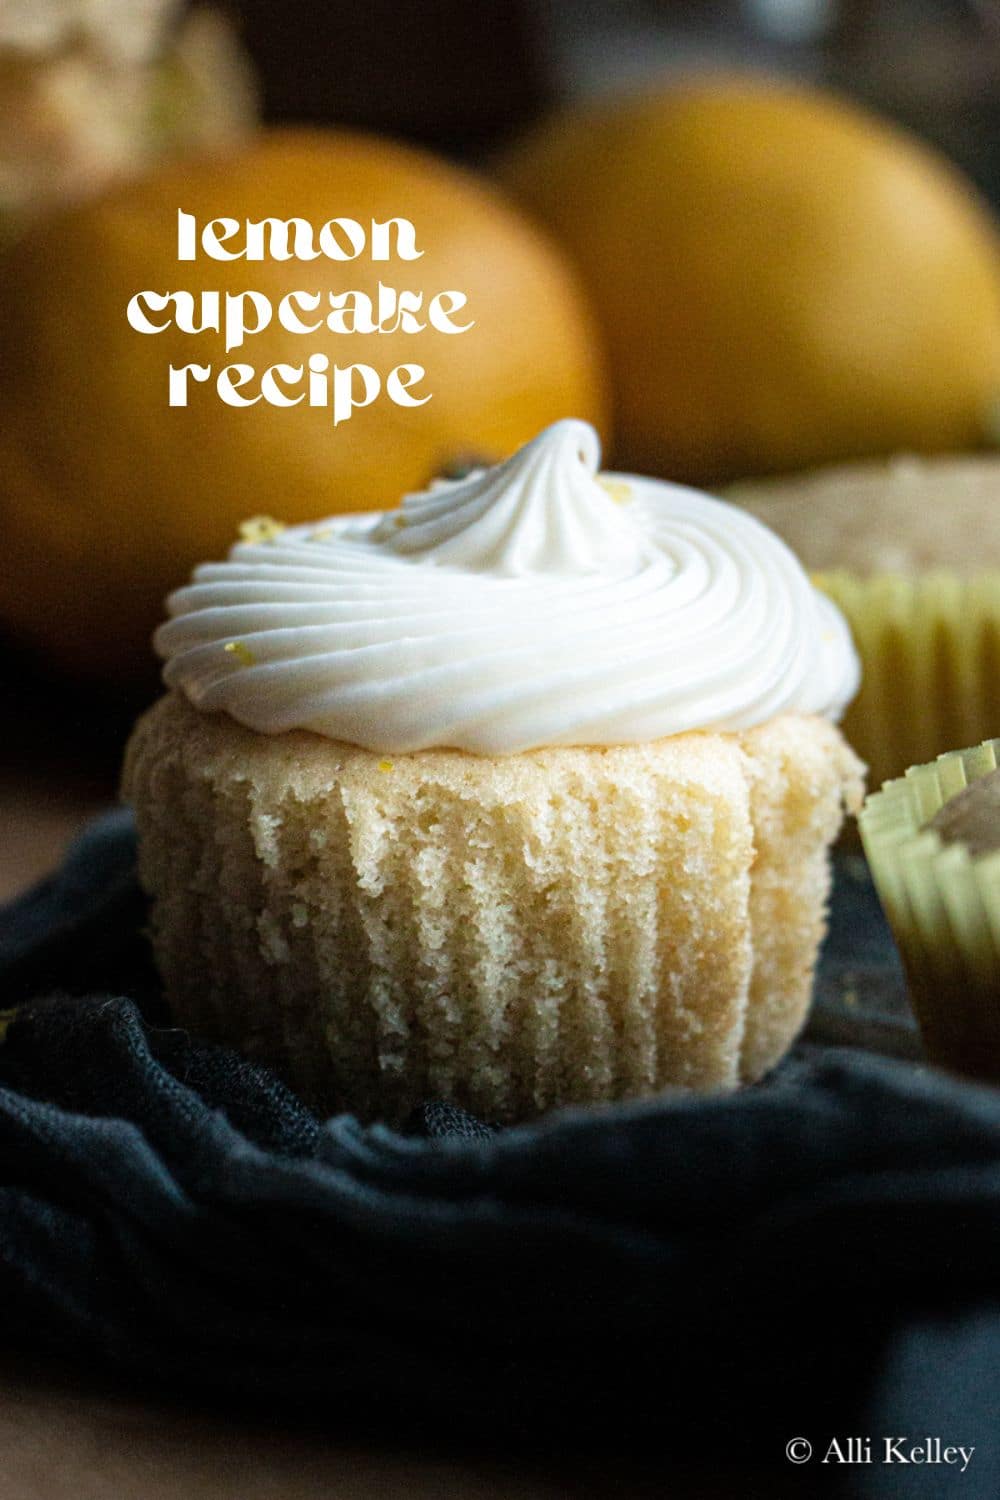 Simple recipe for moist & flavorful honey lemon cupcakes plus three amazing baking tips to make sure your baked goods don't turn out dry or tough! #cupcakes #baking #bakingday #cake #lemon #honey #honeylemon #lemonhoney #lemoncupcakes #lemoncake #lemonhoneycake #honeylemoncake #honeylemoncupcakes #citrus